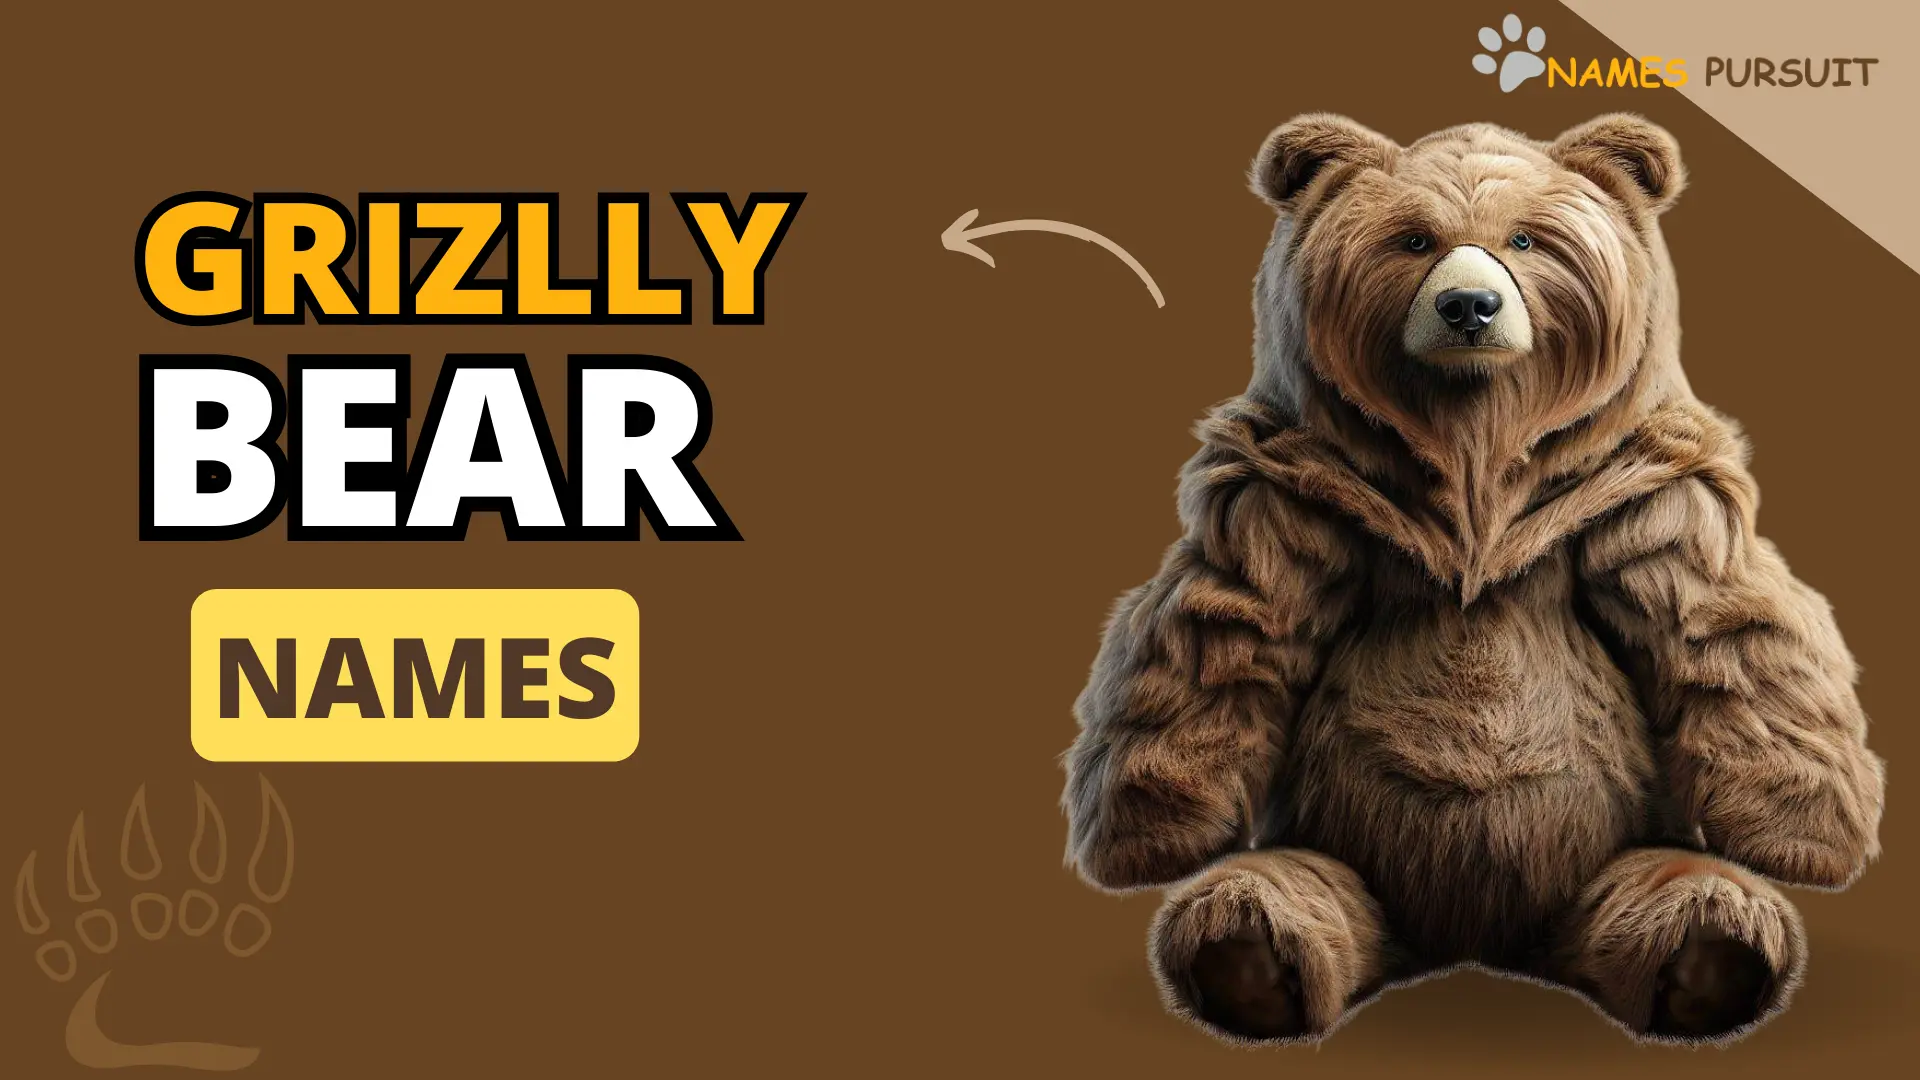 Grizzly Bear Names